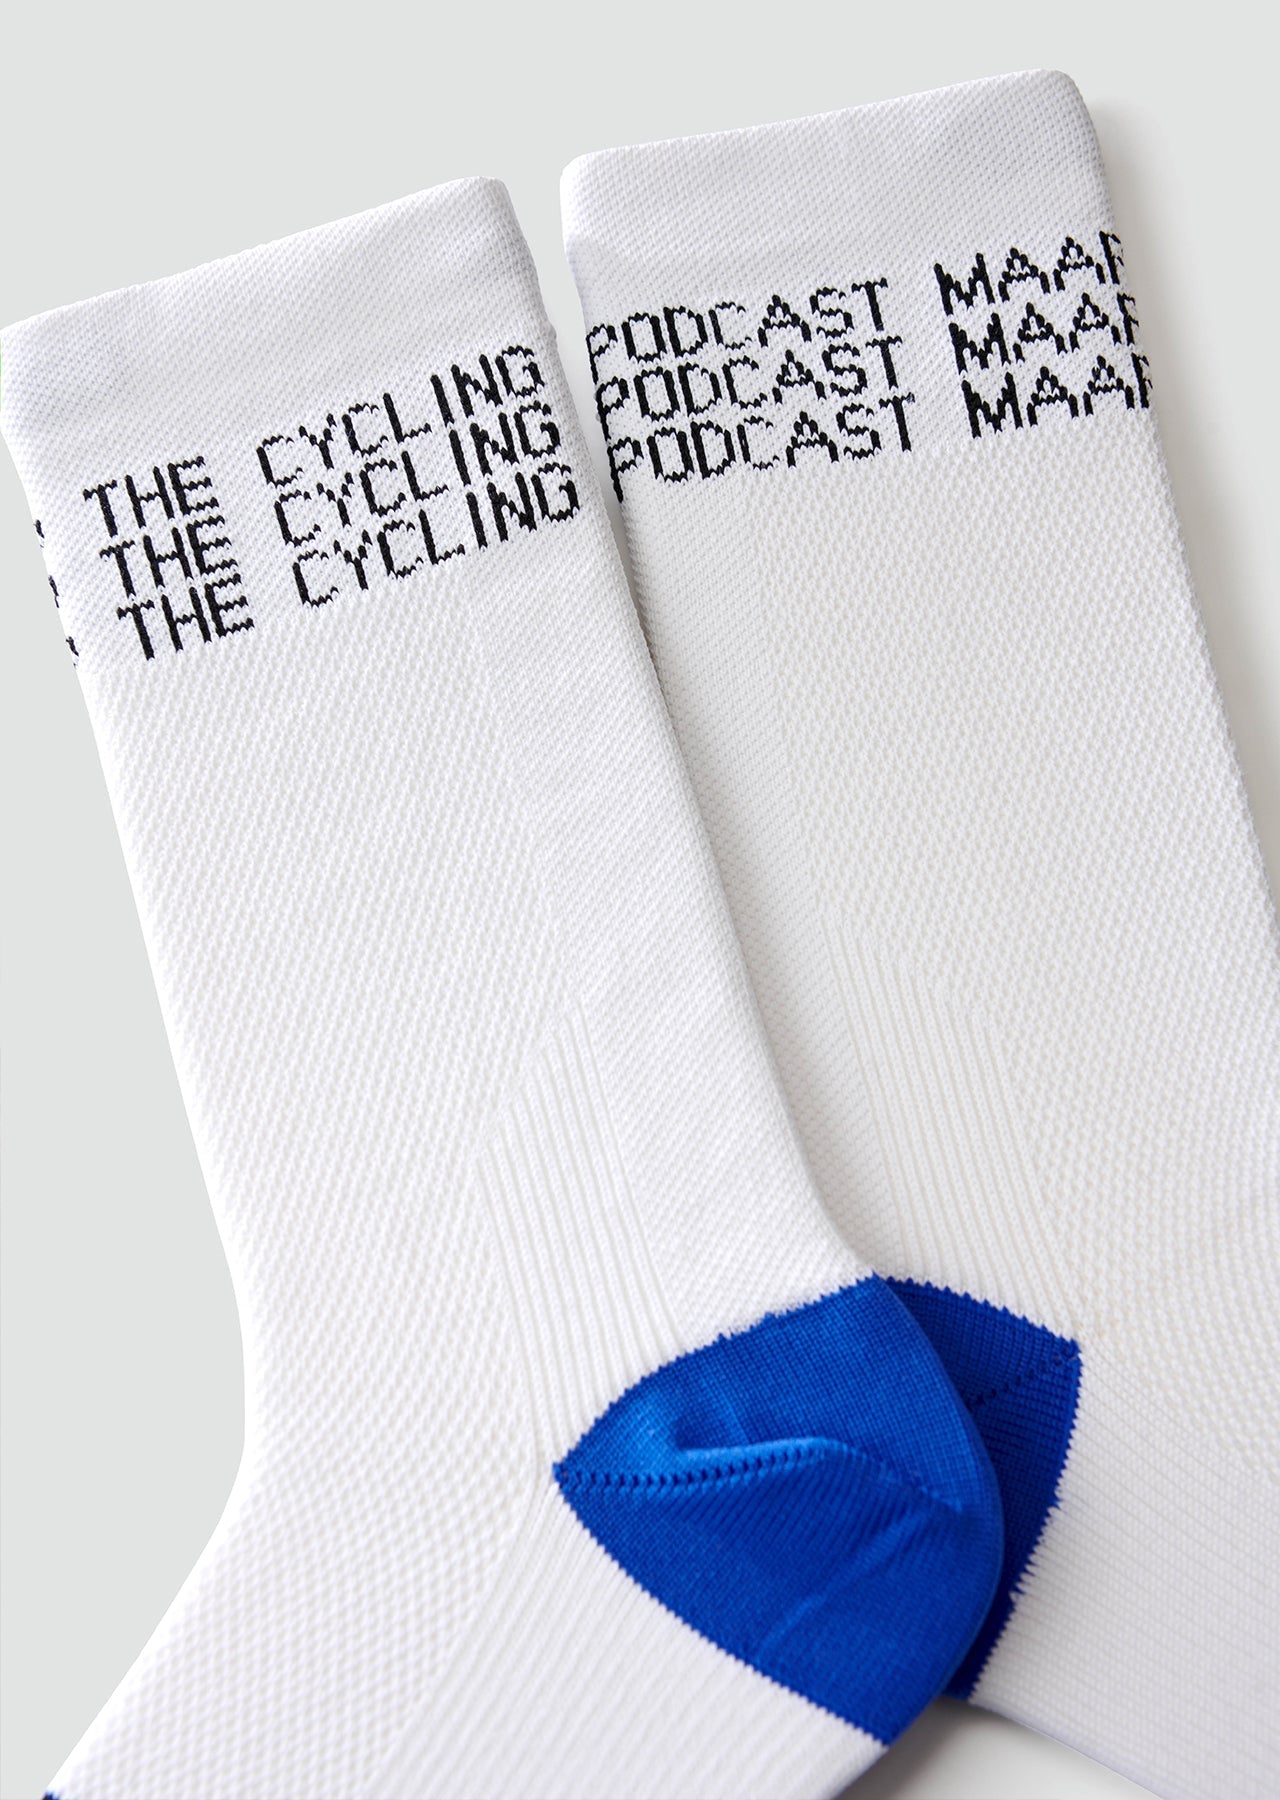 x The Cycling Podcast Sock